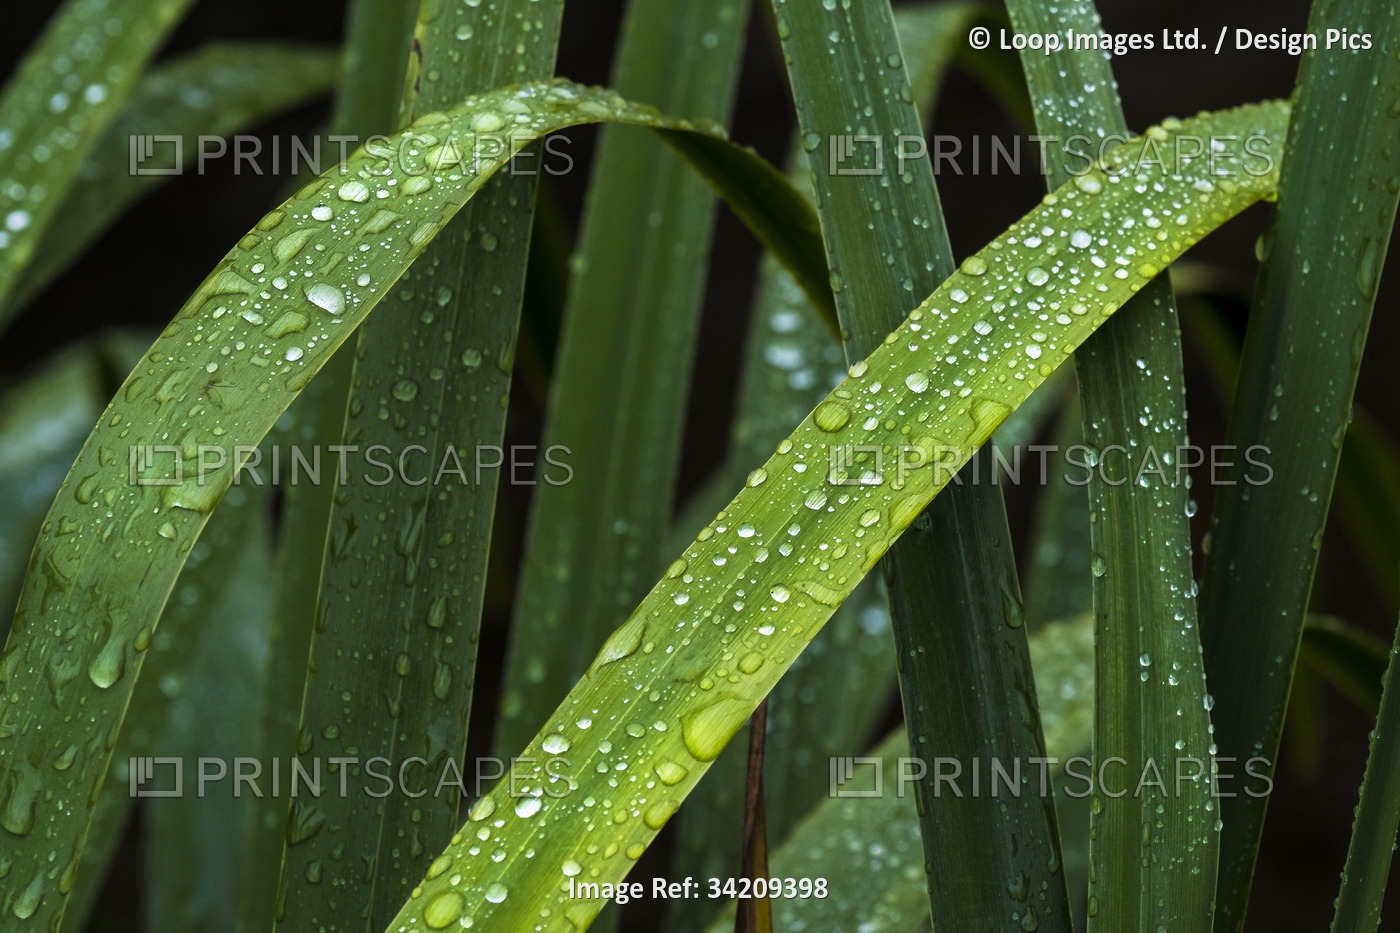 Beads of water on the leaves of an Iris plant.